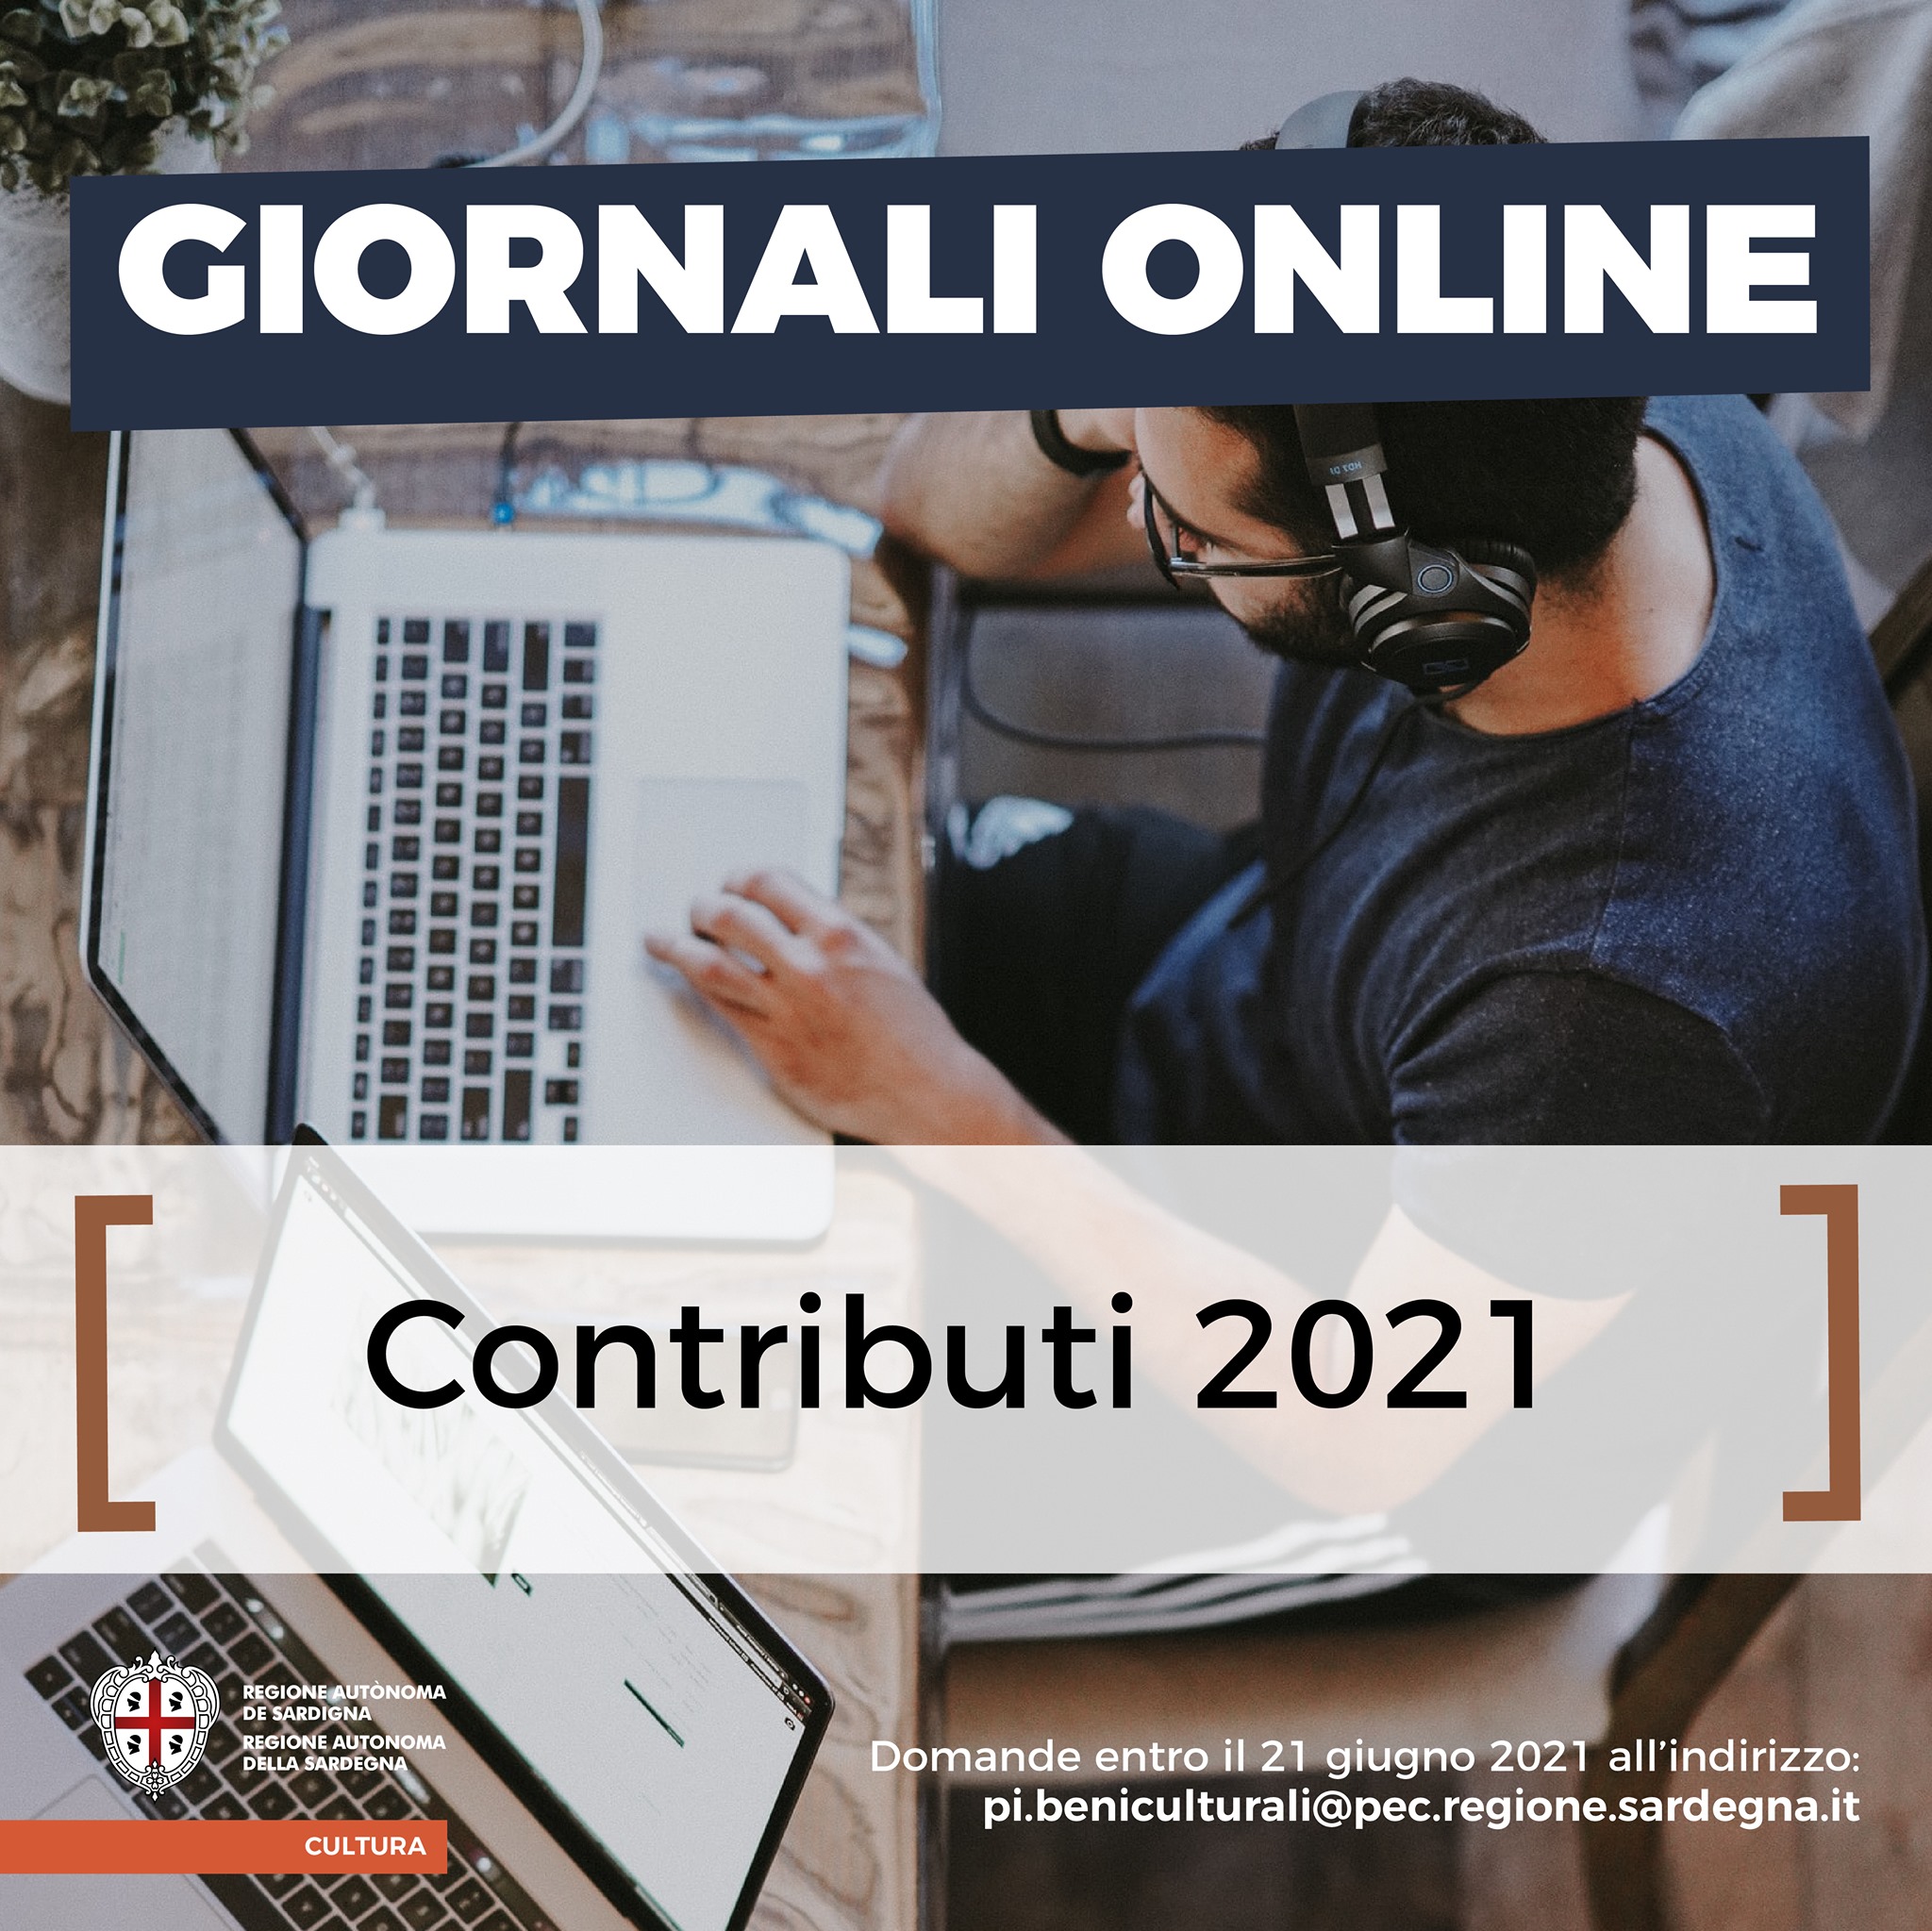 Giornali on line